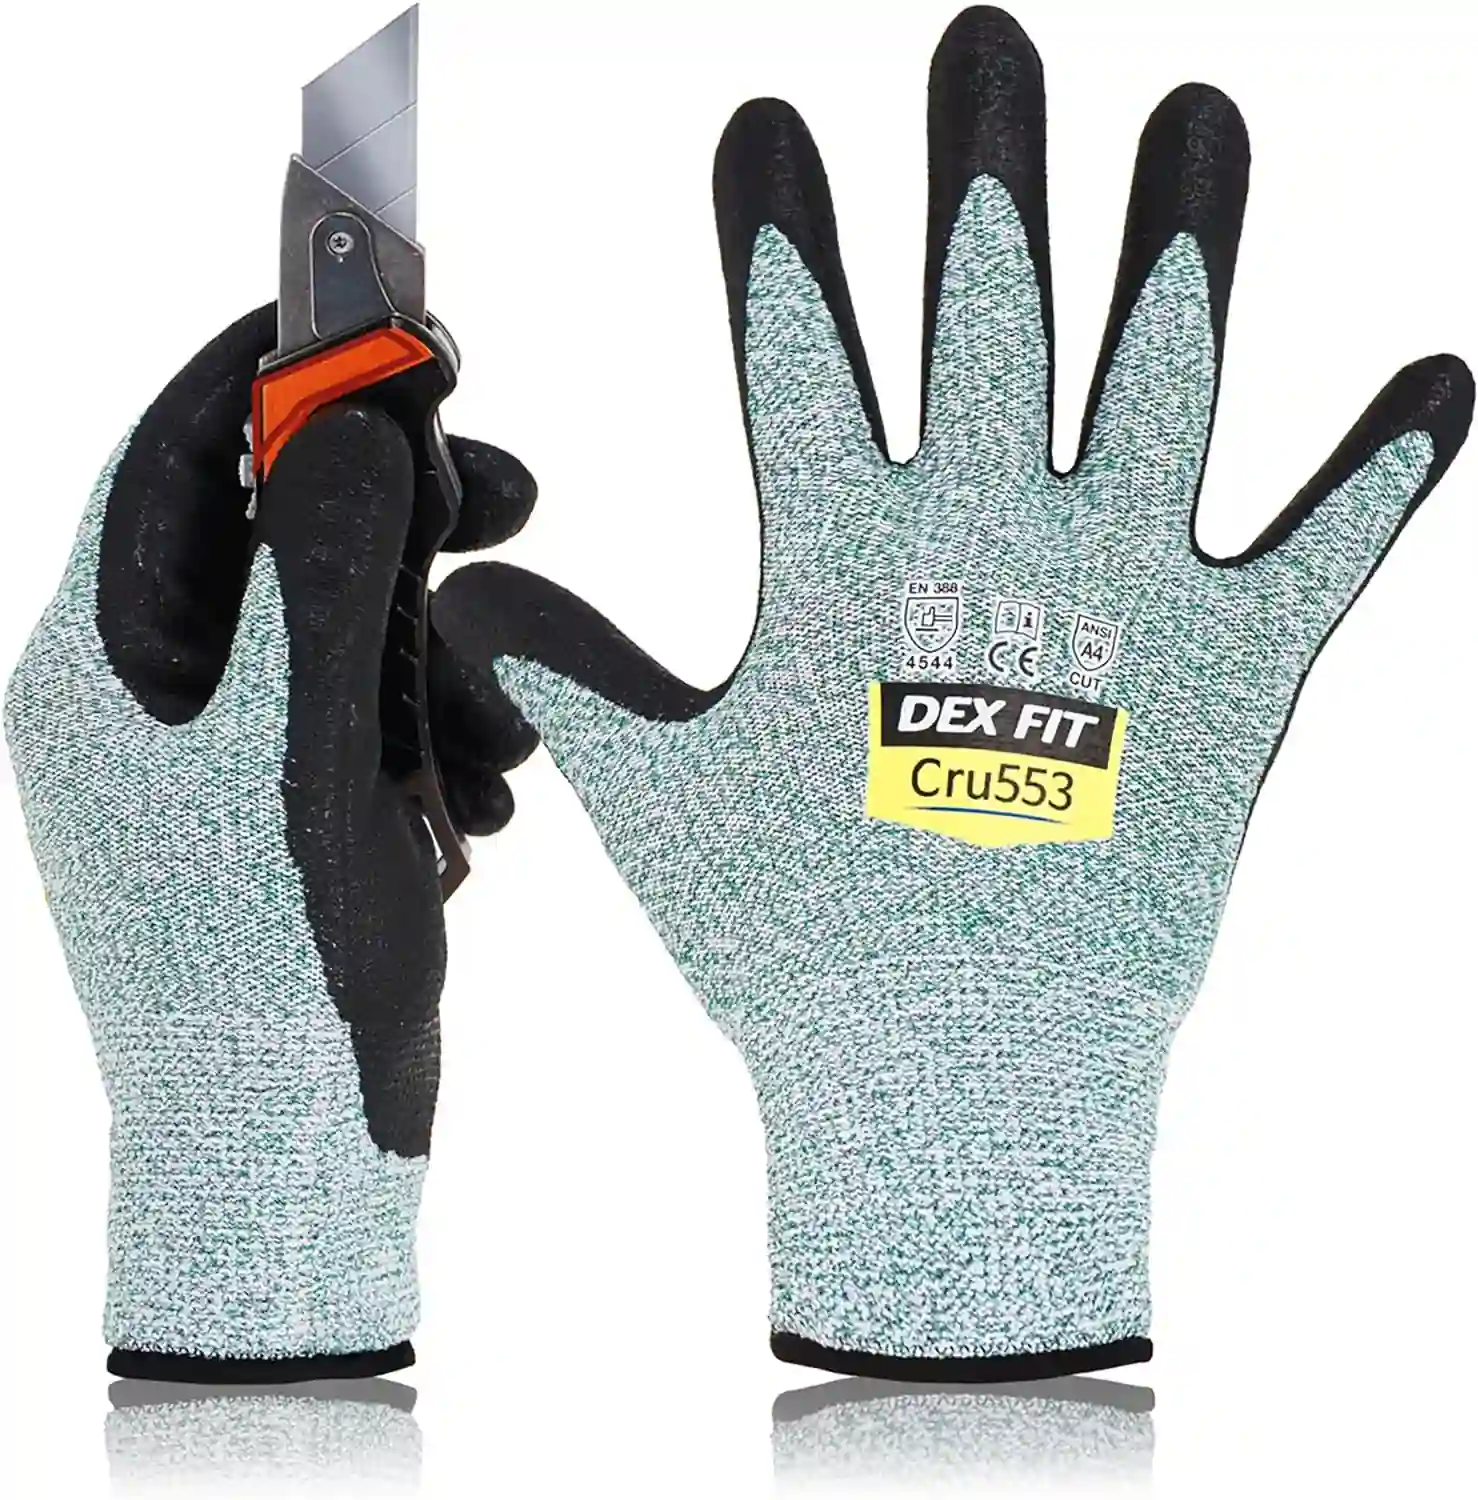 Hand gloves for construction